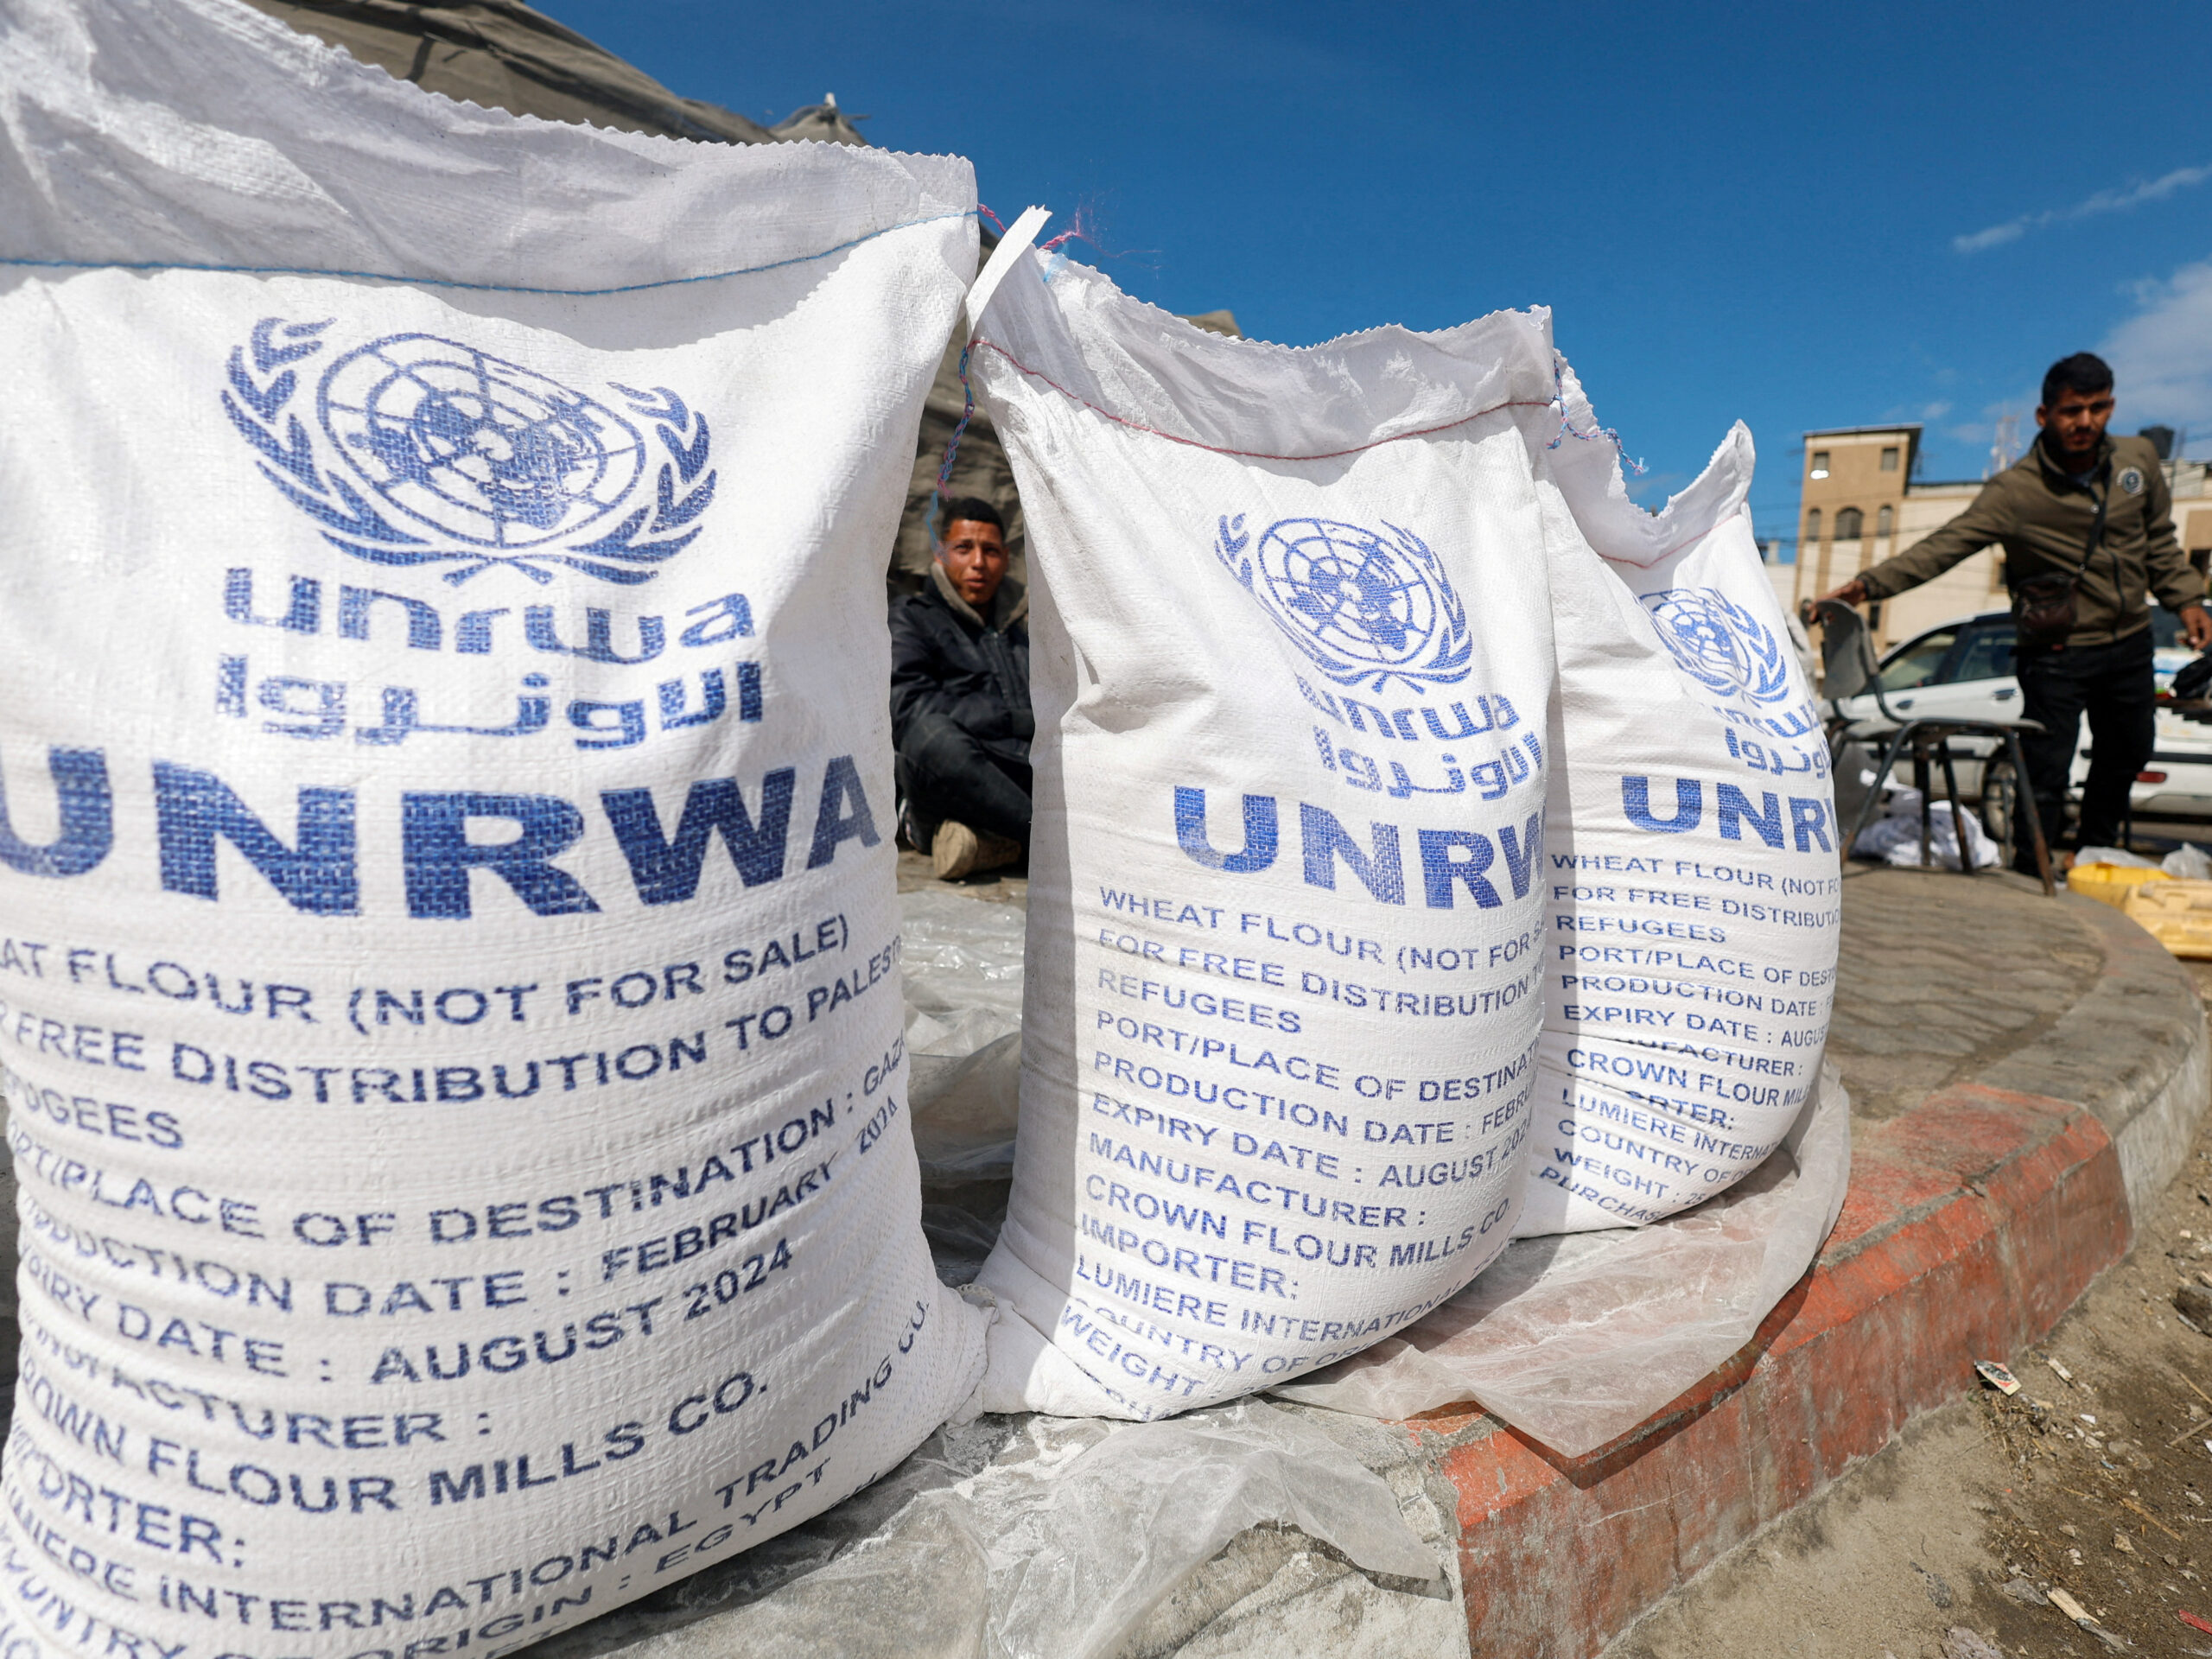 Report on UNRWA concludes Israel has not provided evidence of employees’ militancy